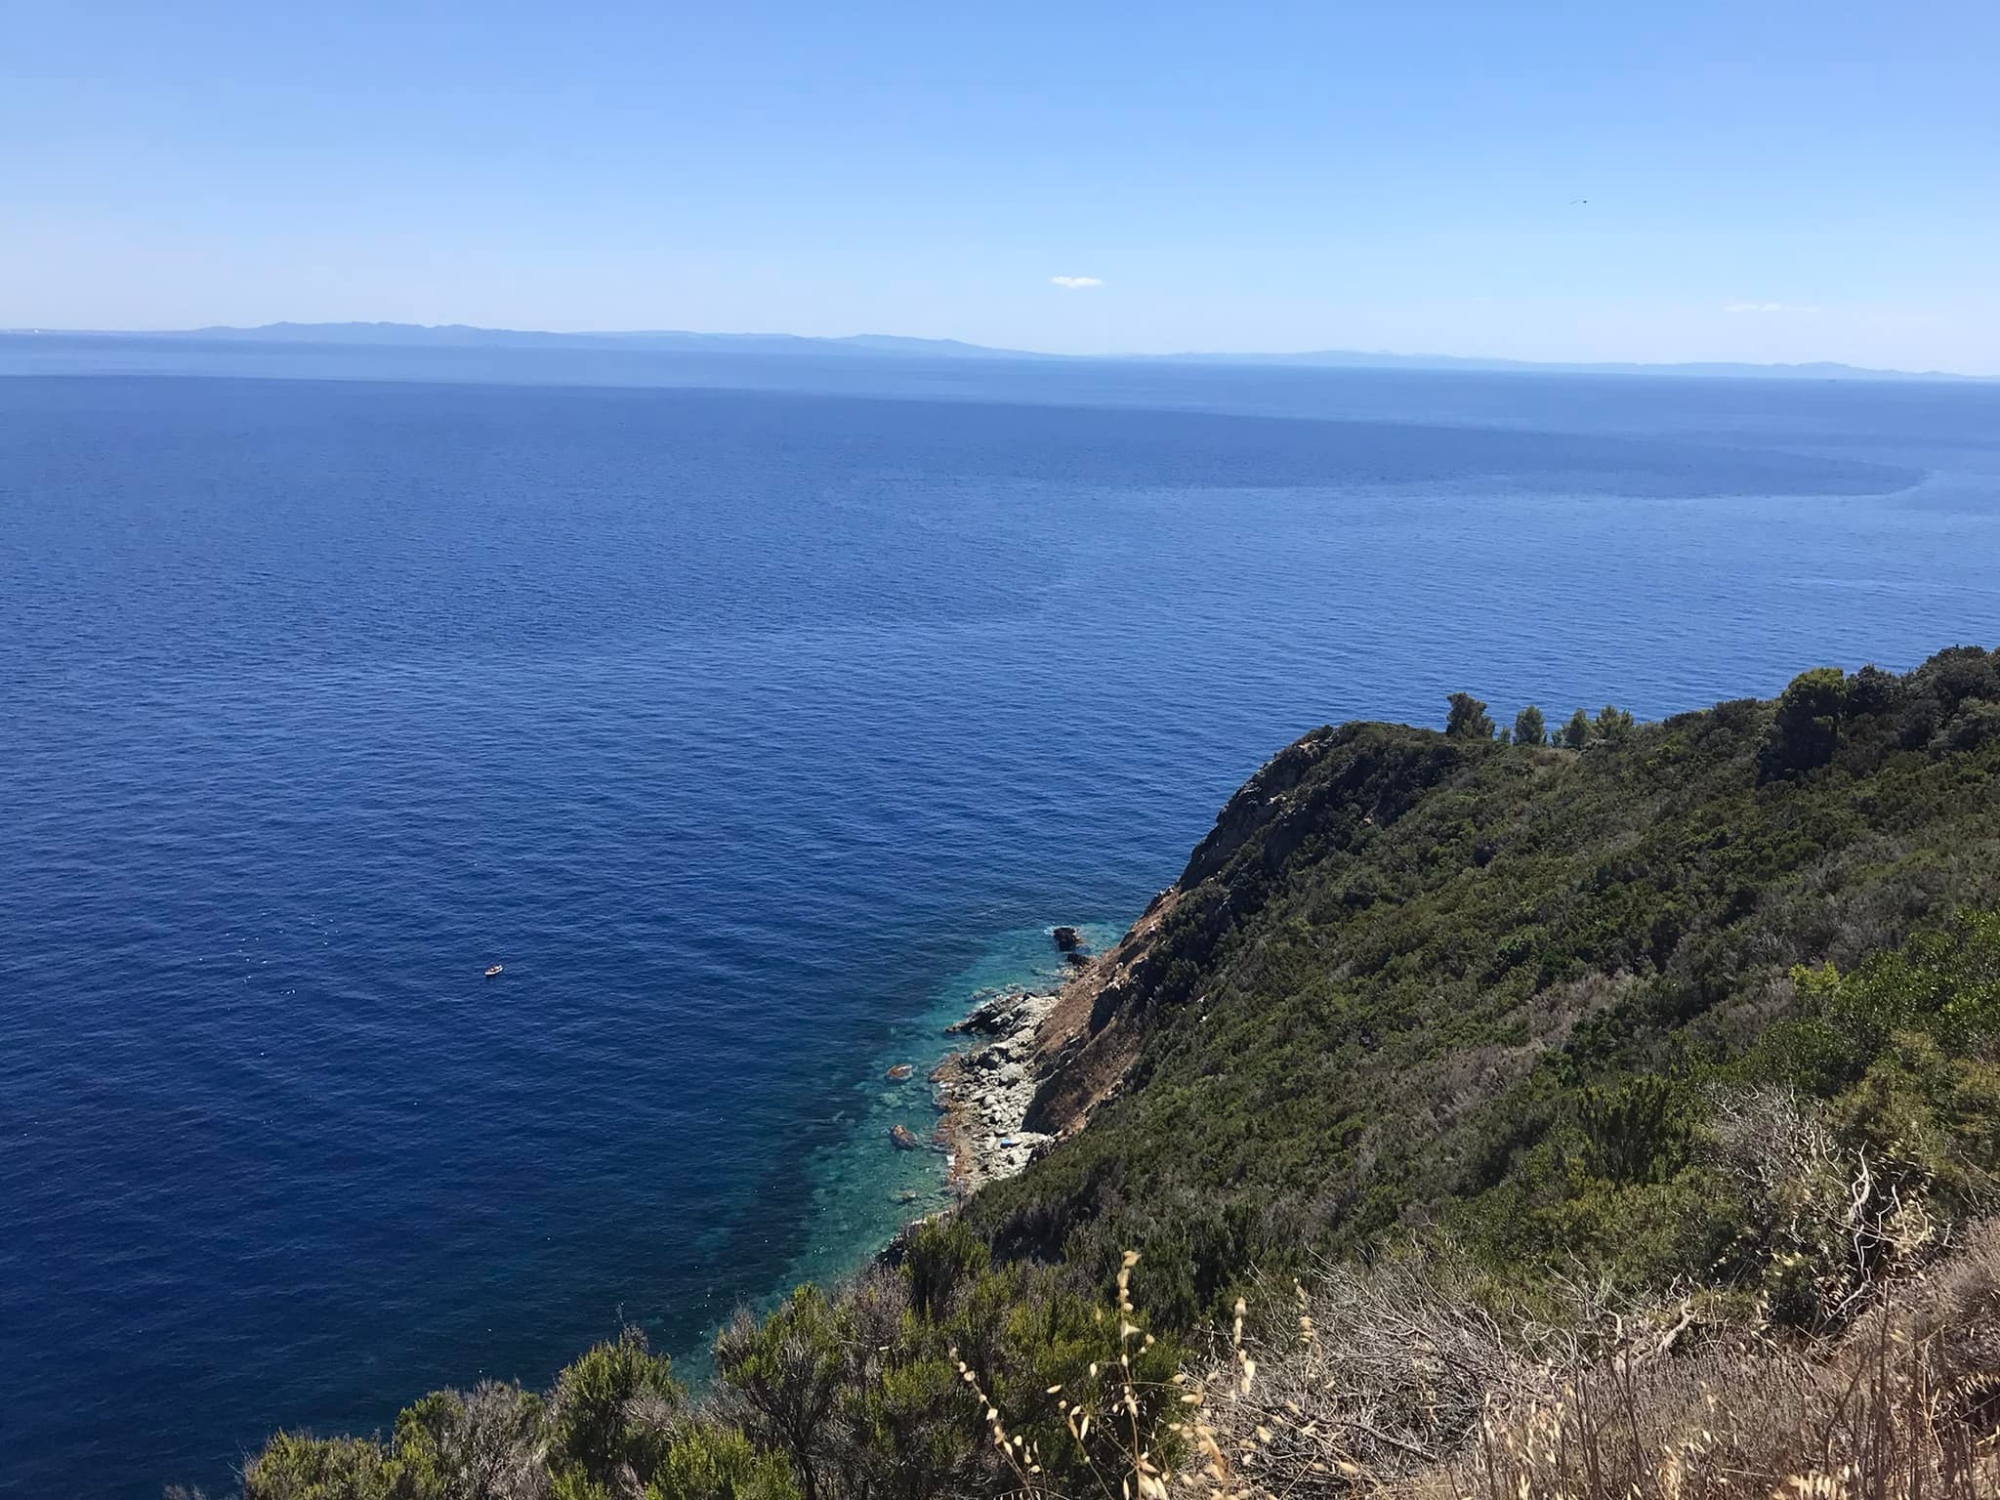 Excursion to the island of Gorgona, the most exclusive and protected island of the Tuscan Archipelago